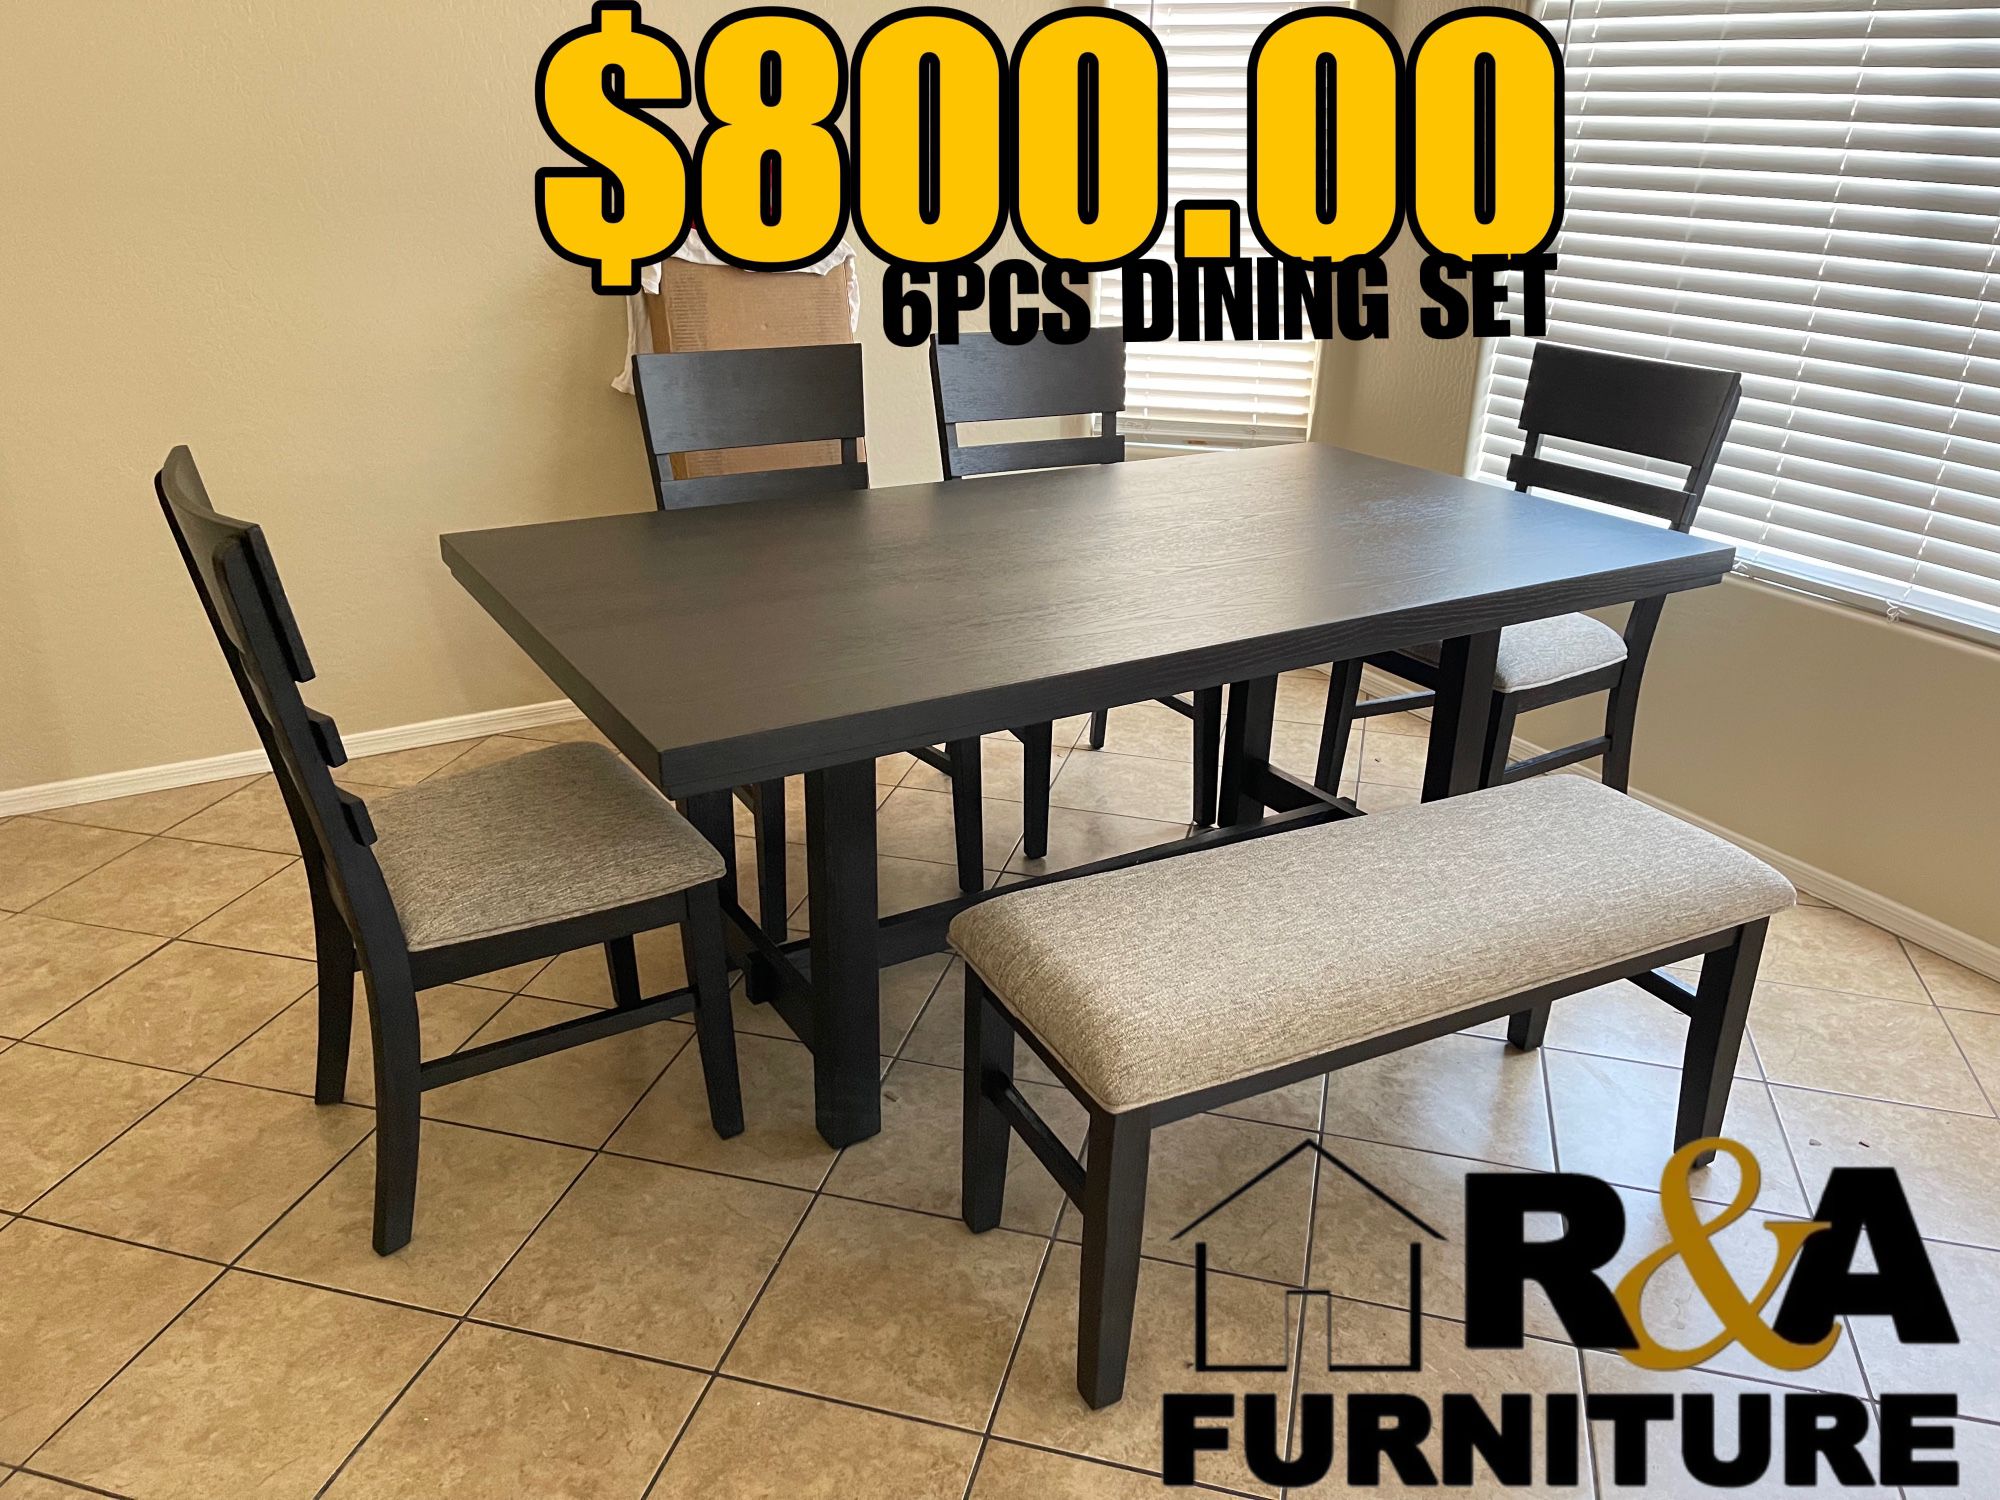 DINING TABLE SET 